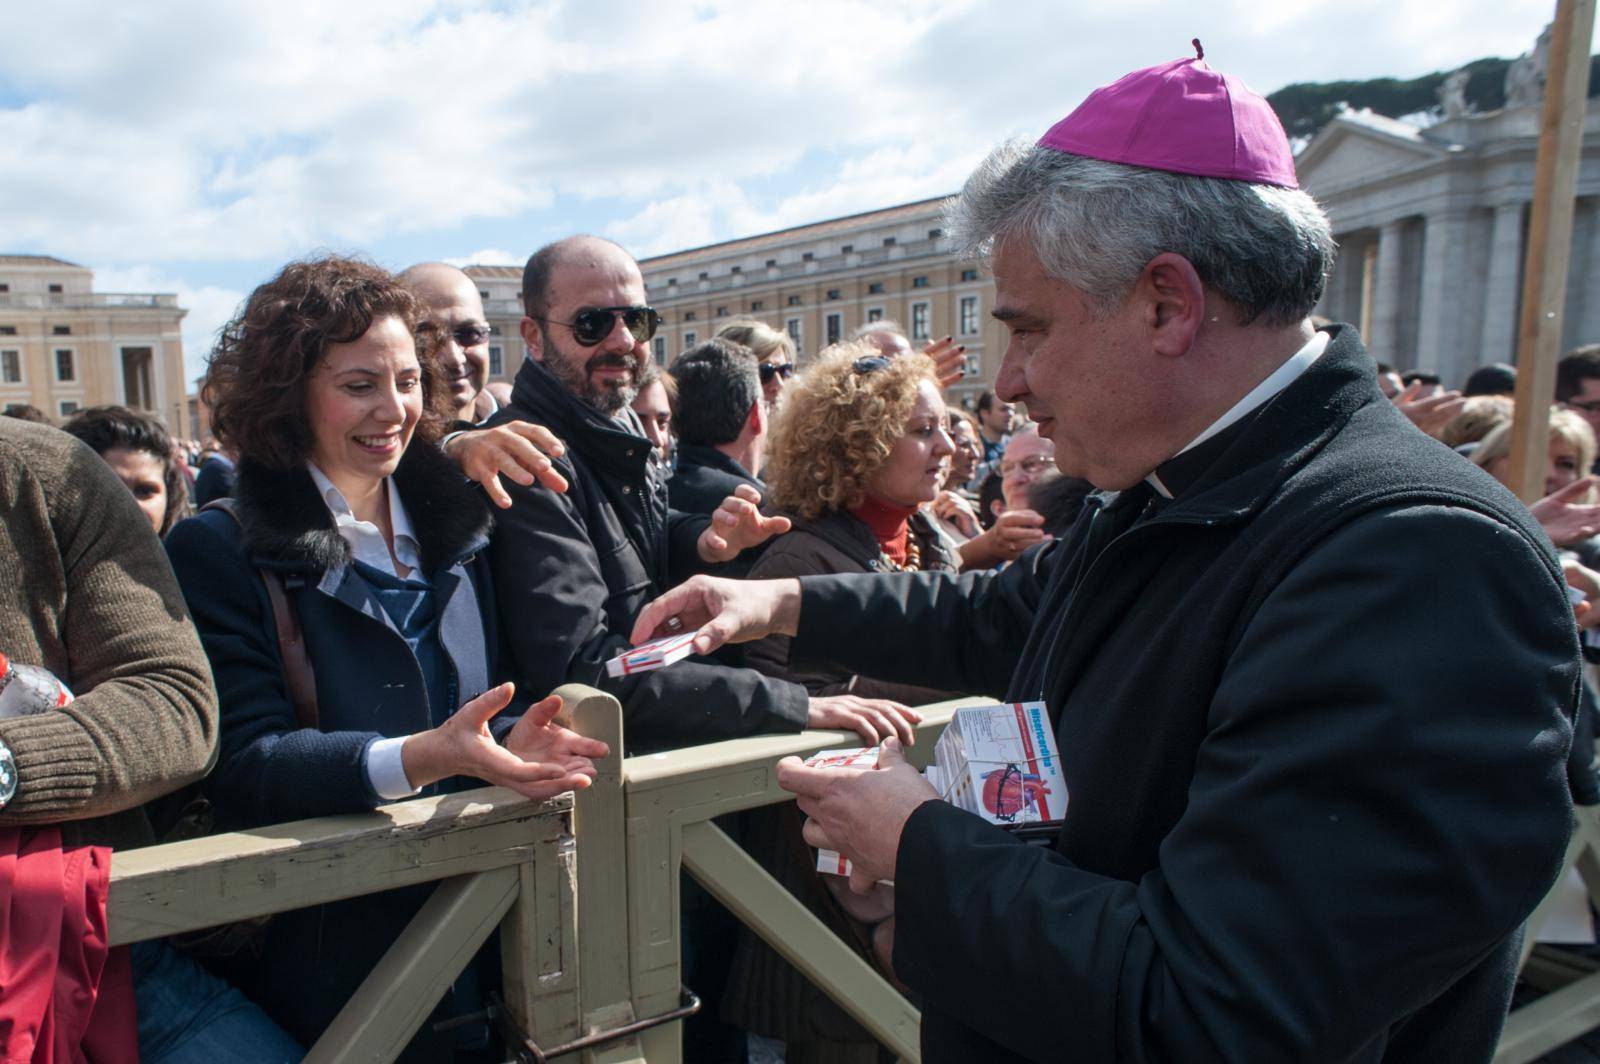 February 21, 2016 : Rosary boxes "Misericordina" is distributed during the Pope Francis Sunday prayer in St. Peter's square at the Vatican.